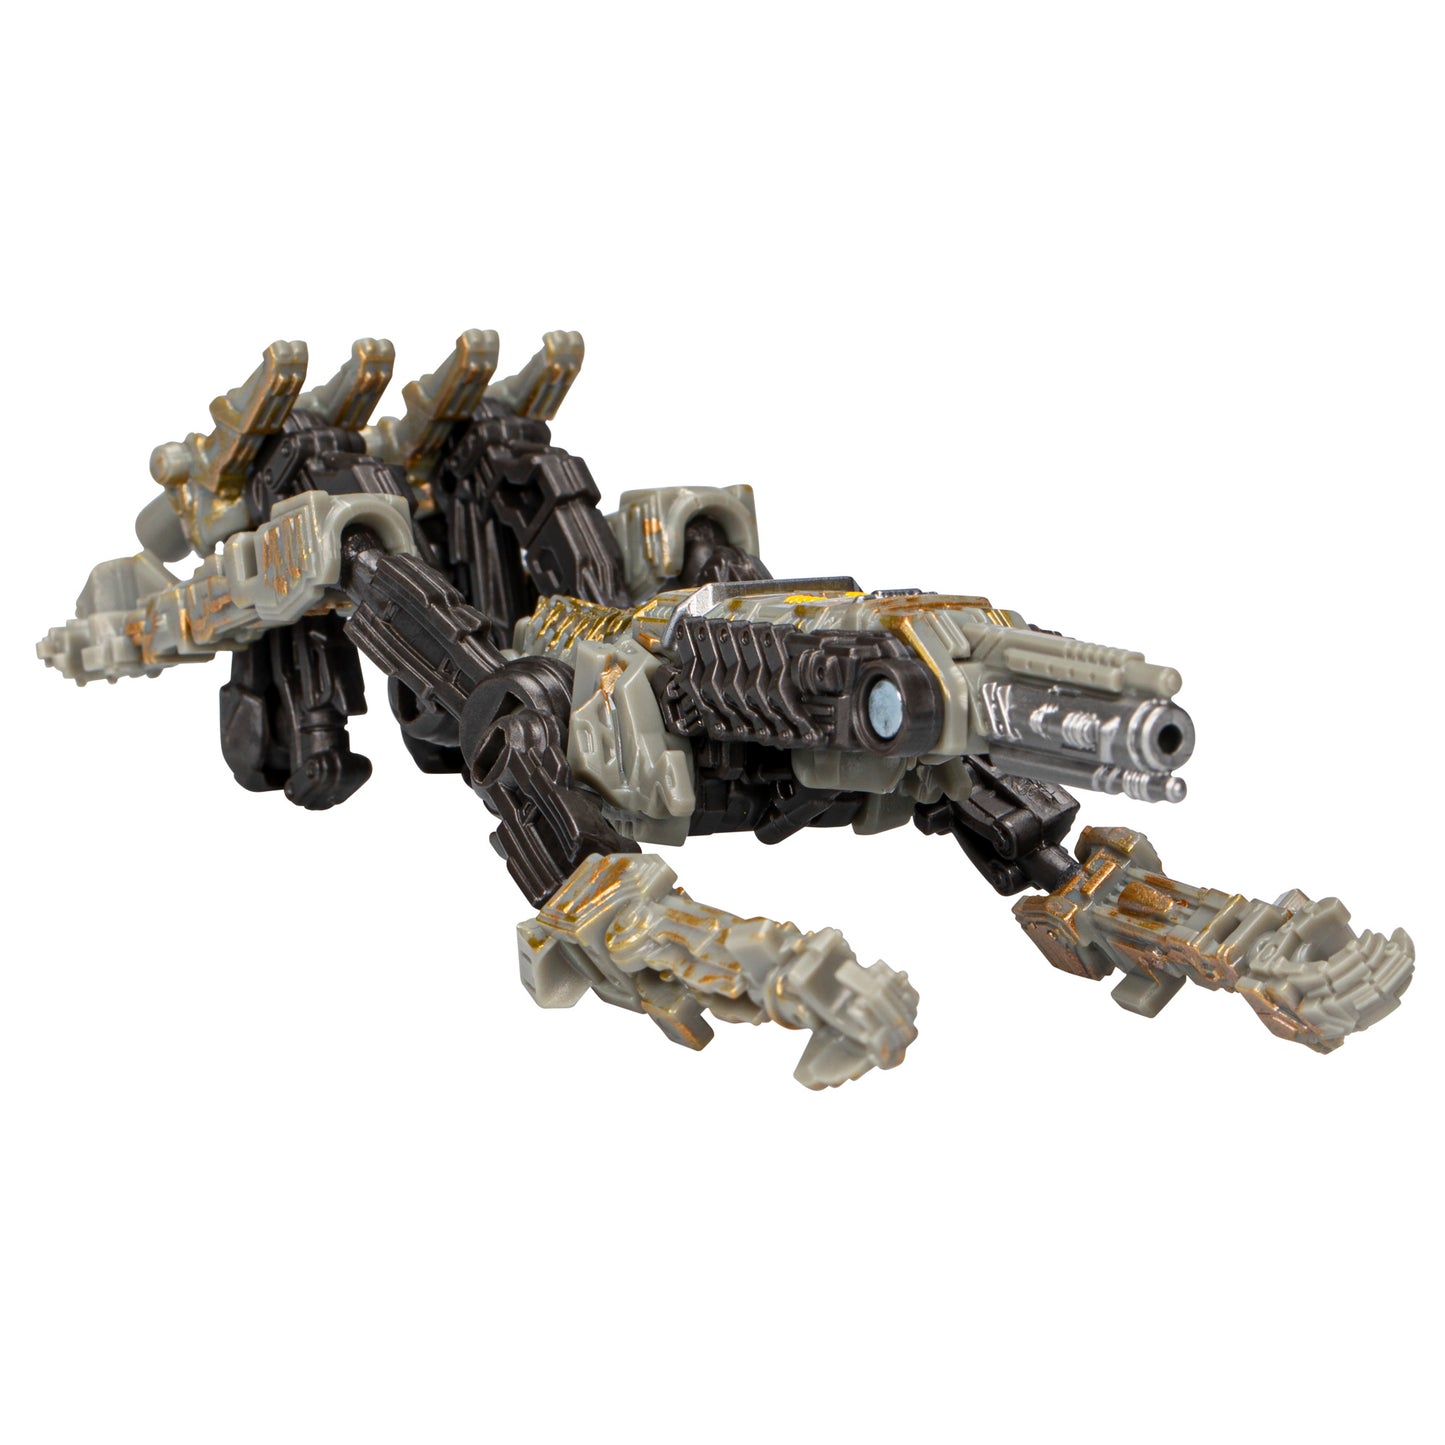 Transformers Toys Studio Series Transformers: Rise of the Beasts Terrorcon Novakane Toy, 3.5-inch, Action Figures For Boys And Girls Ages 8 and Up